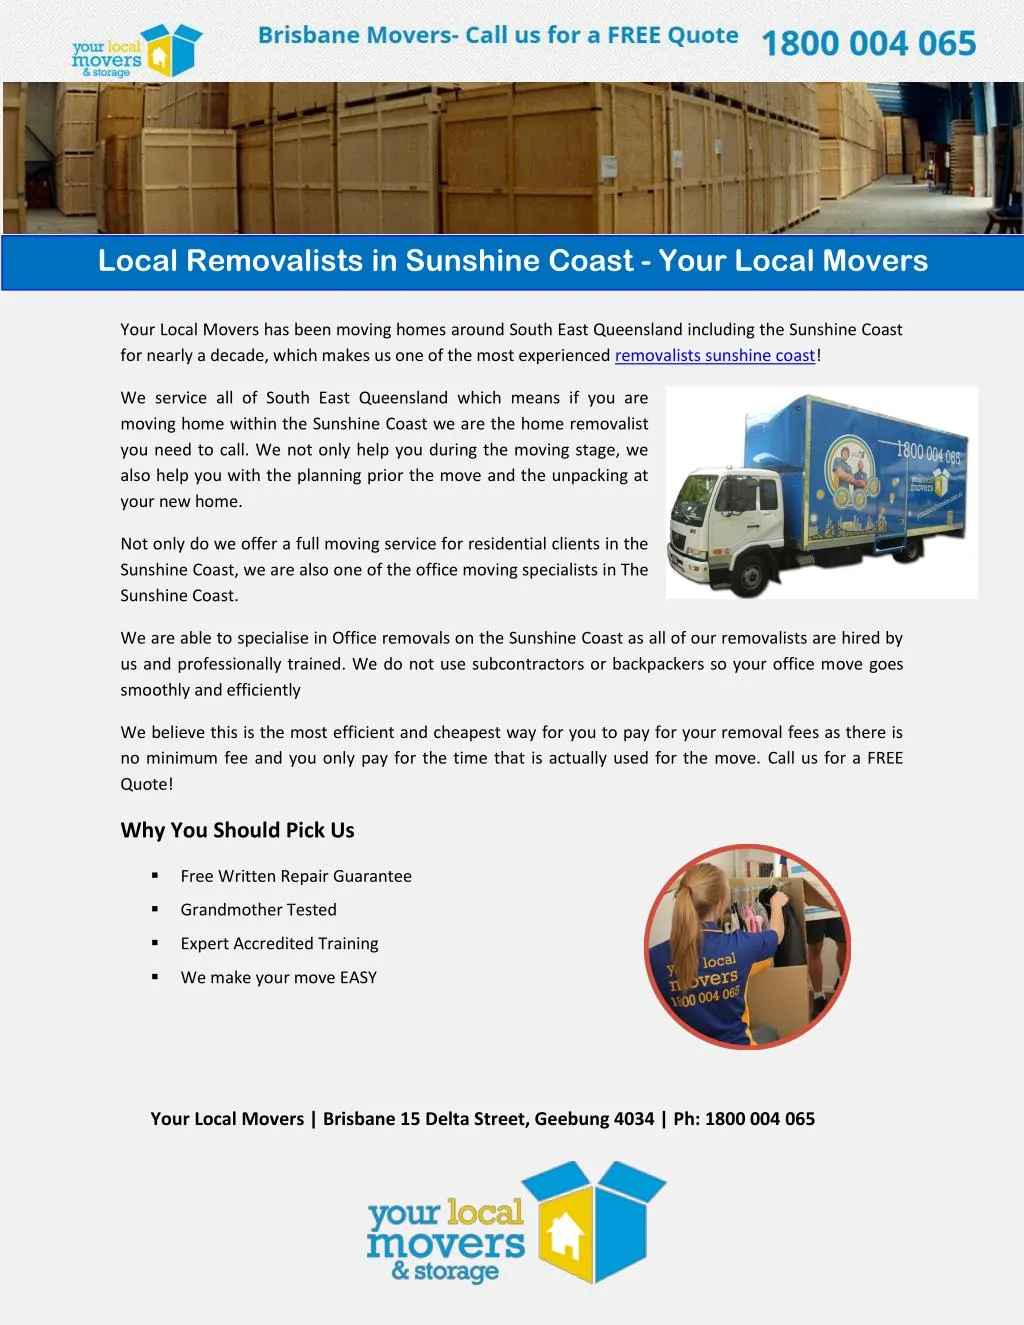 local removalists in sunshine coast your local